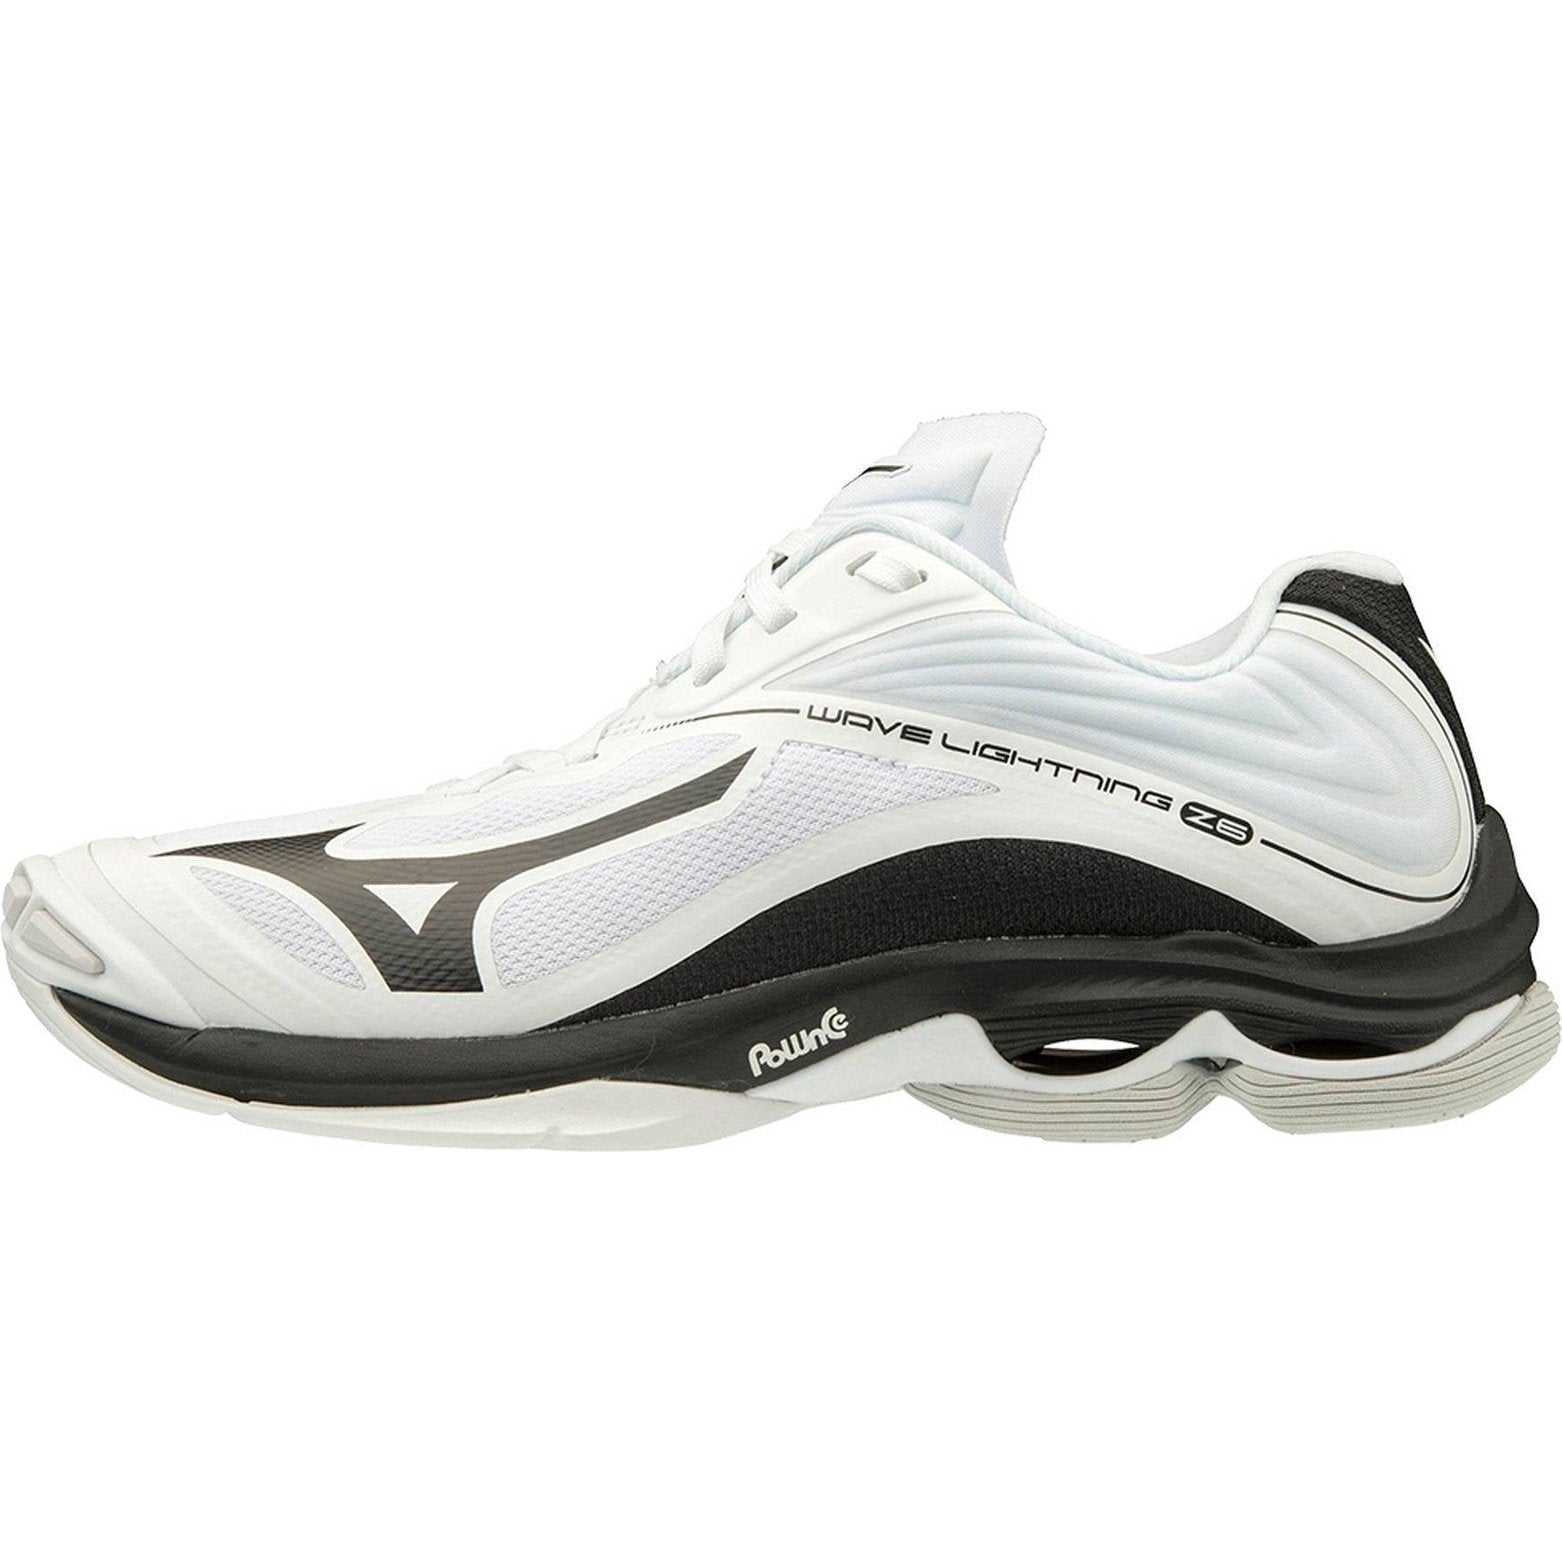 Mizuno Wave Lightning Z6 Womens Volleyball Shoes - White Black